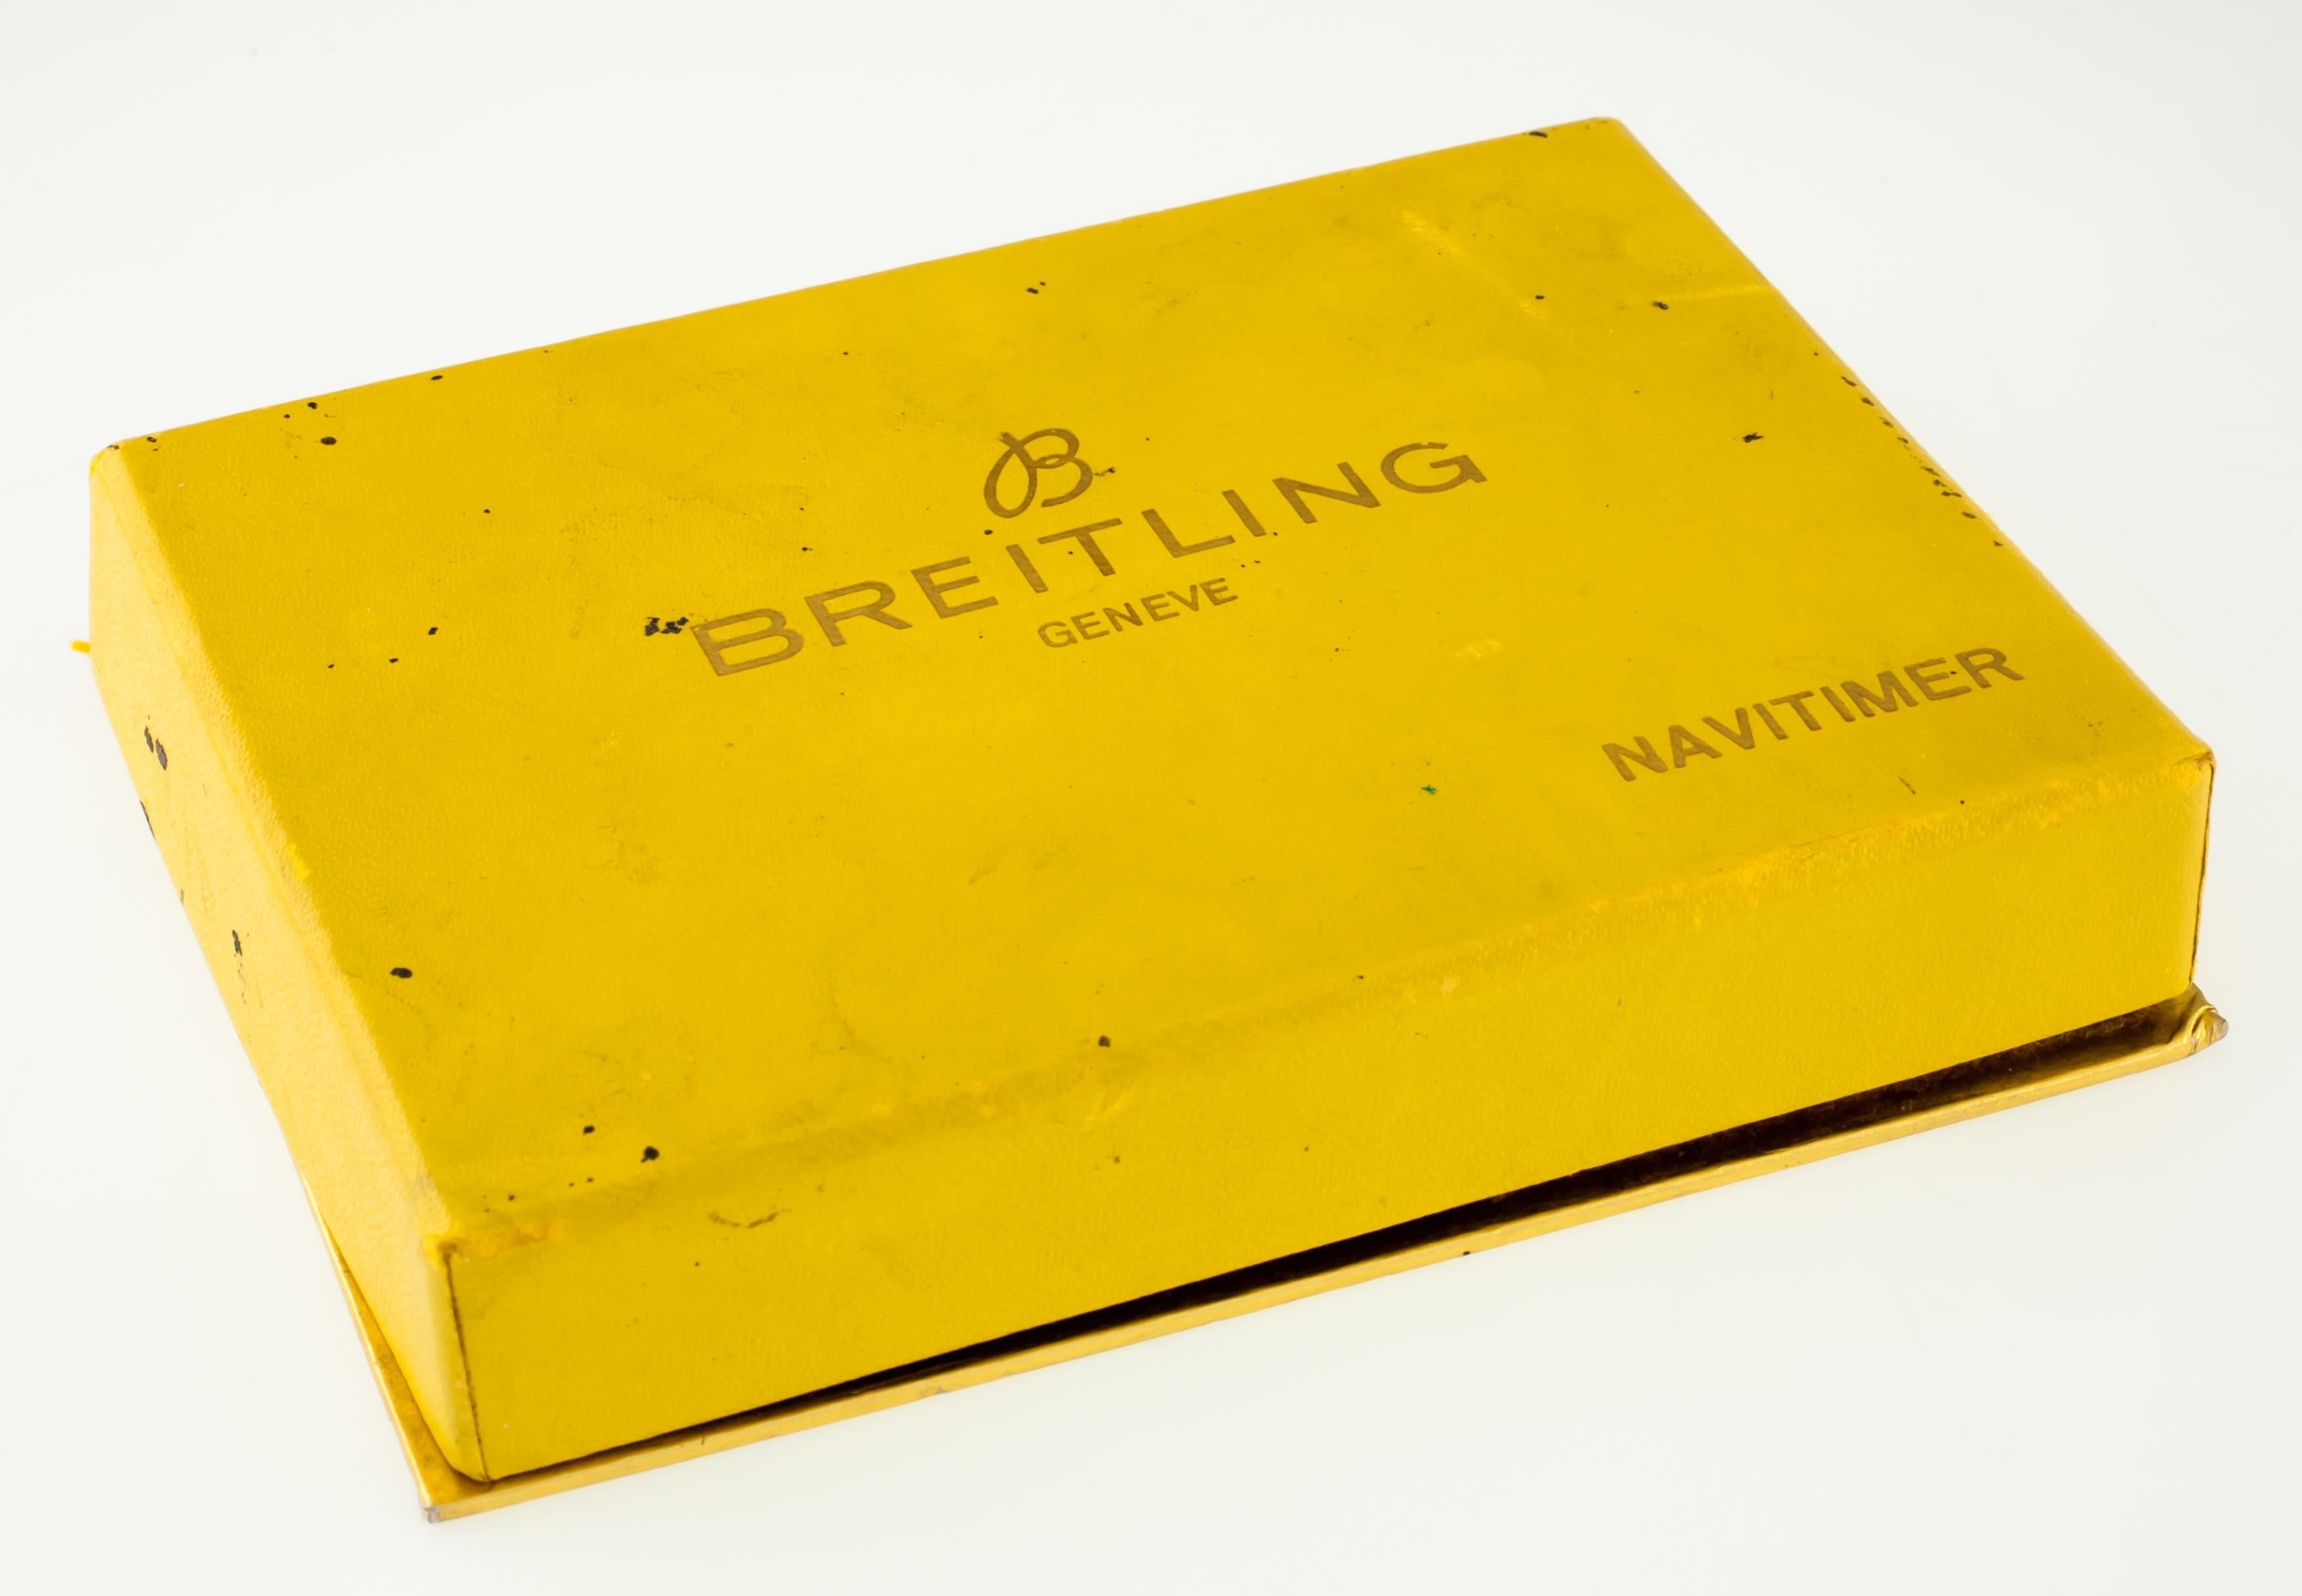 Breitling Navitimer Gold-Plated Chronograph Watch 806 with Box and Papers For Sale 1